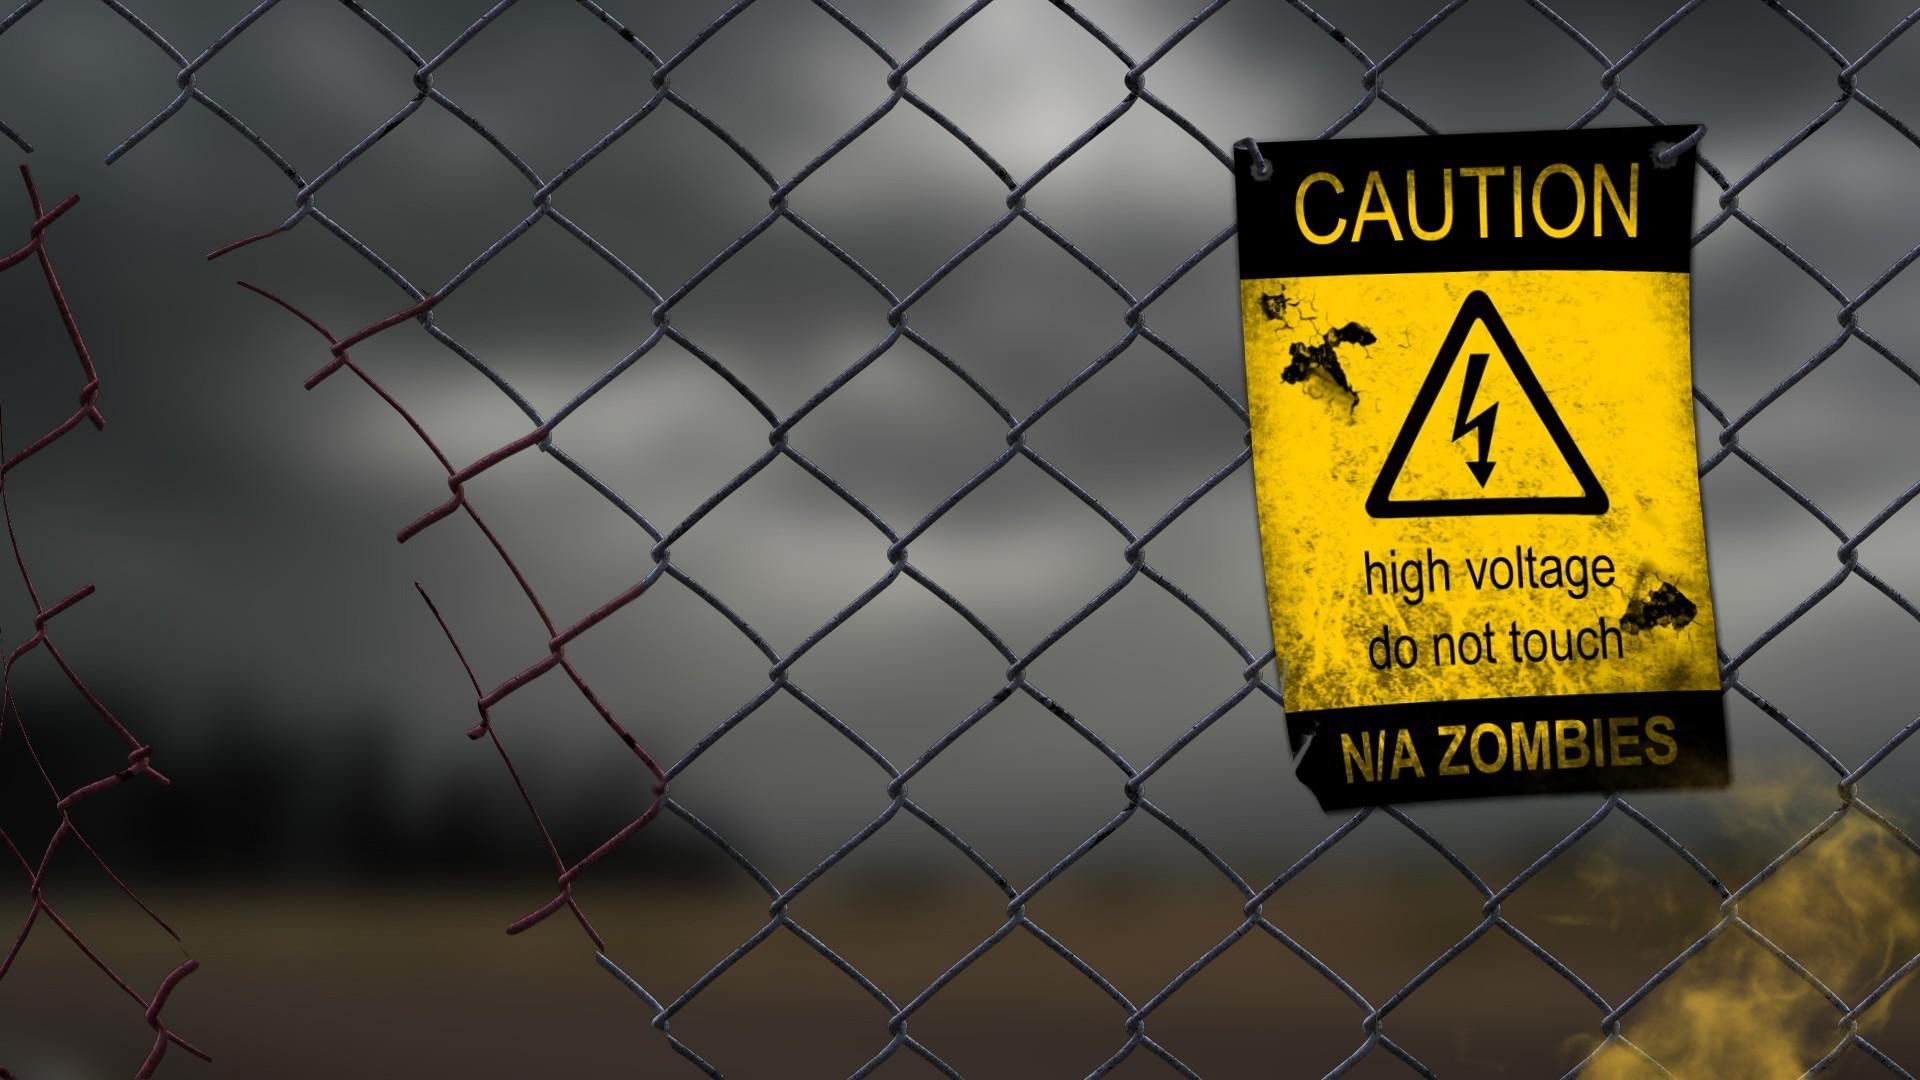 Wallpapers : sign, warning signs, zombies, high voltage, shape, line